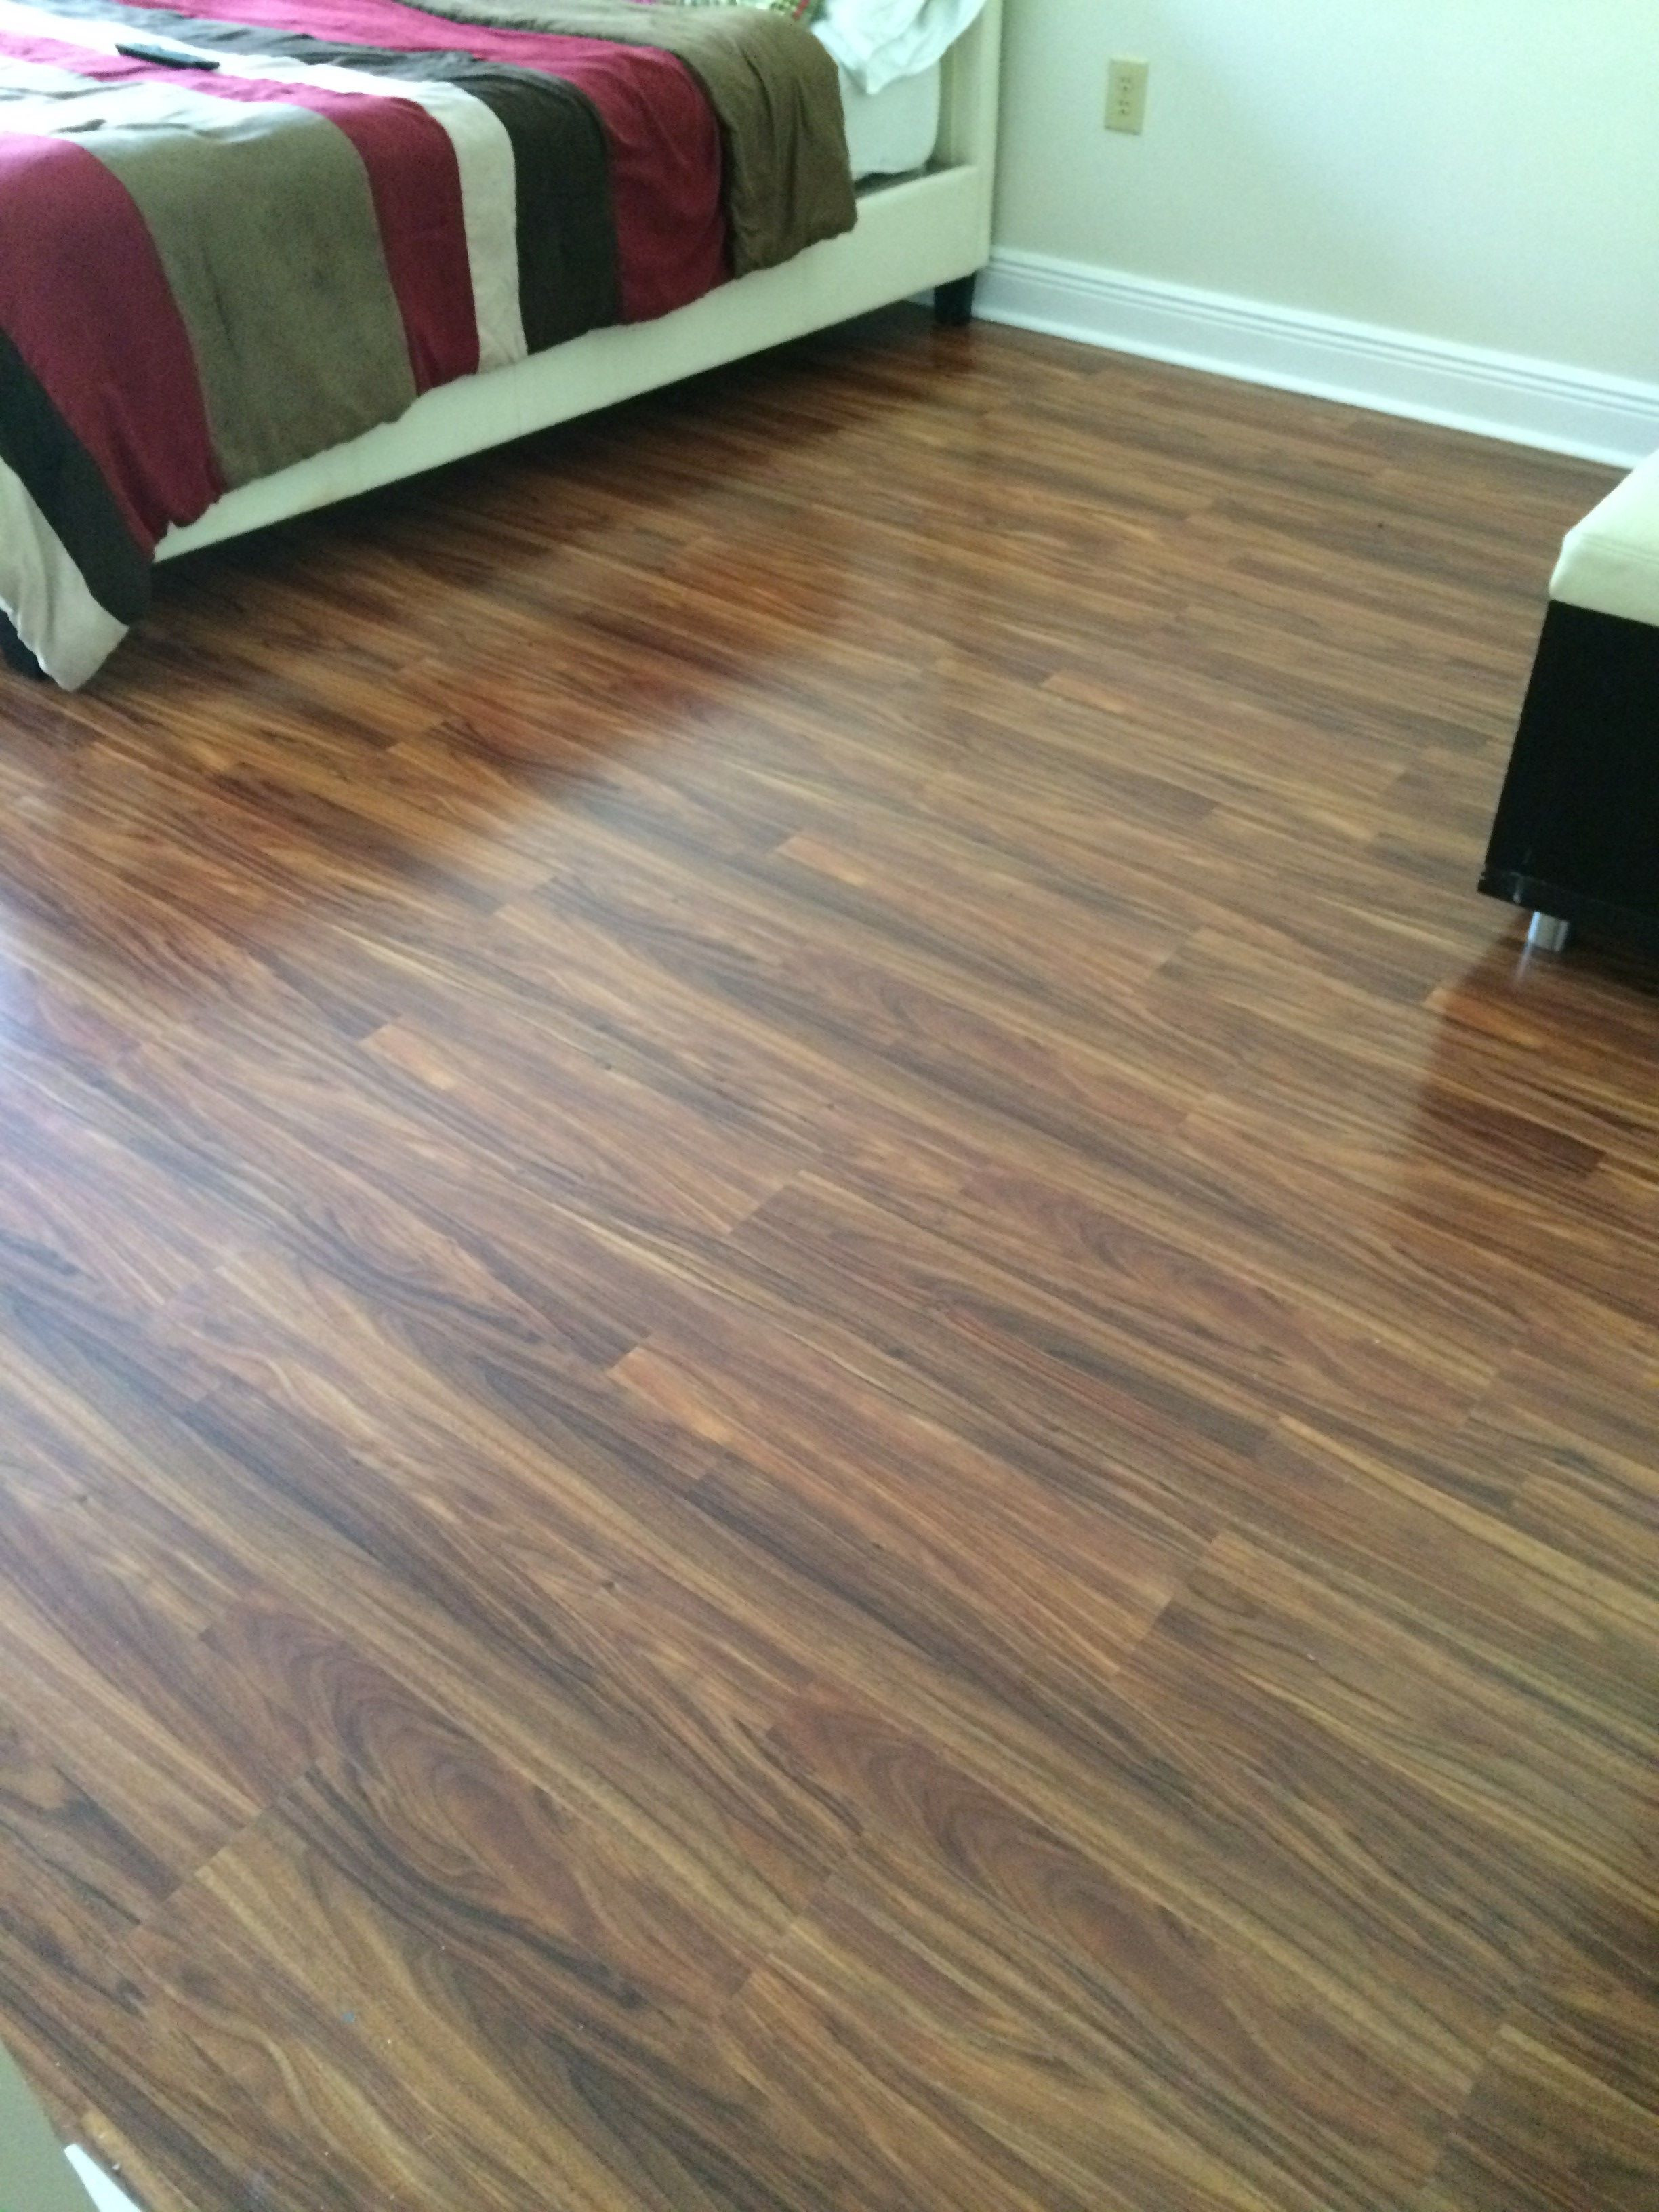 bruce hardwood floor underlayment of pergo fruitwood in a bedroom from bruce a beautiful contrasting pertaining to pergo fruitwood in a bedroom from bruce a beautiful contrasting planks